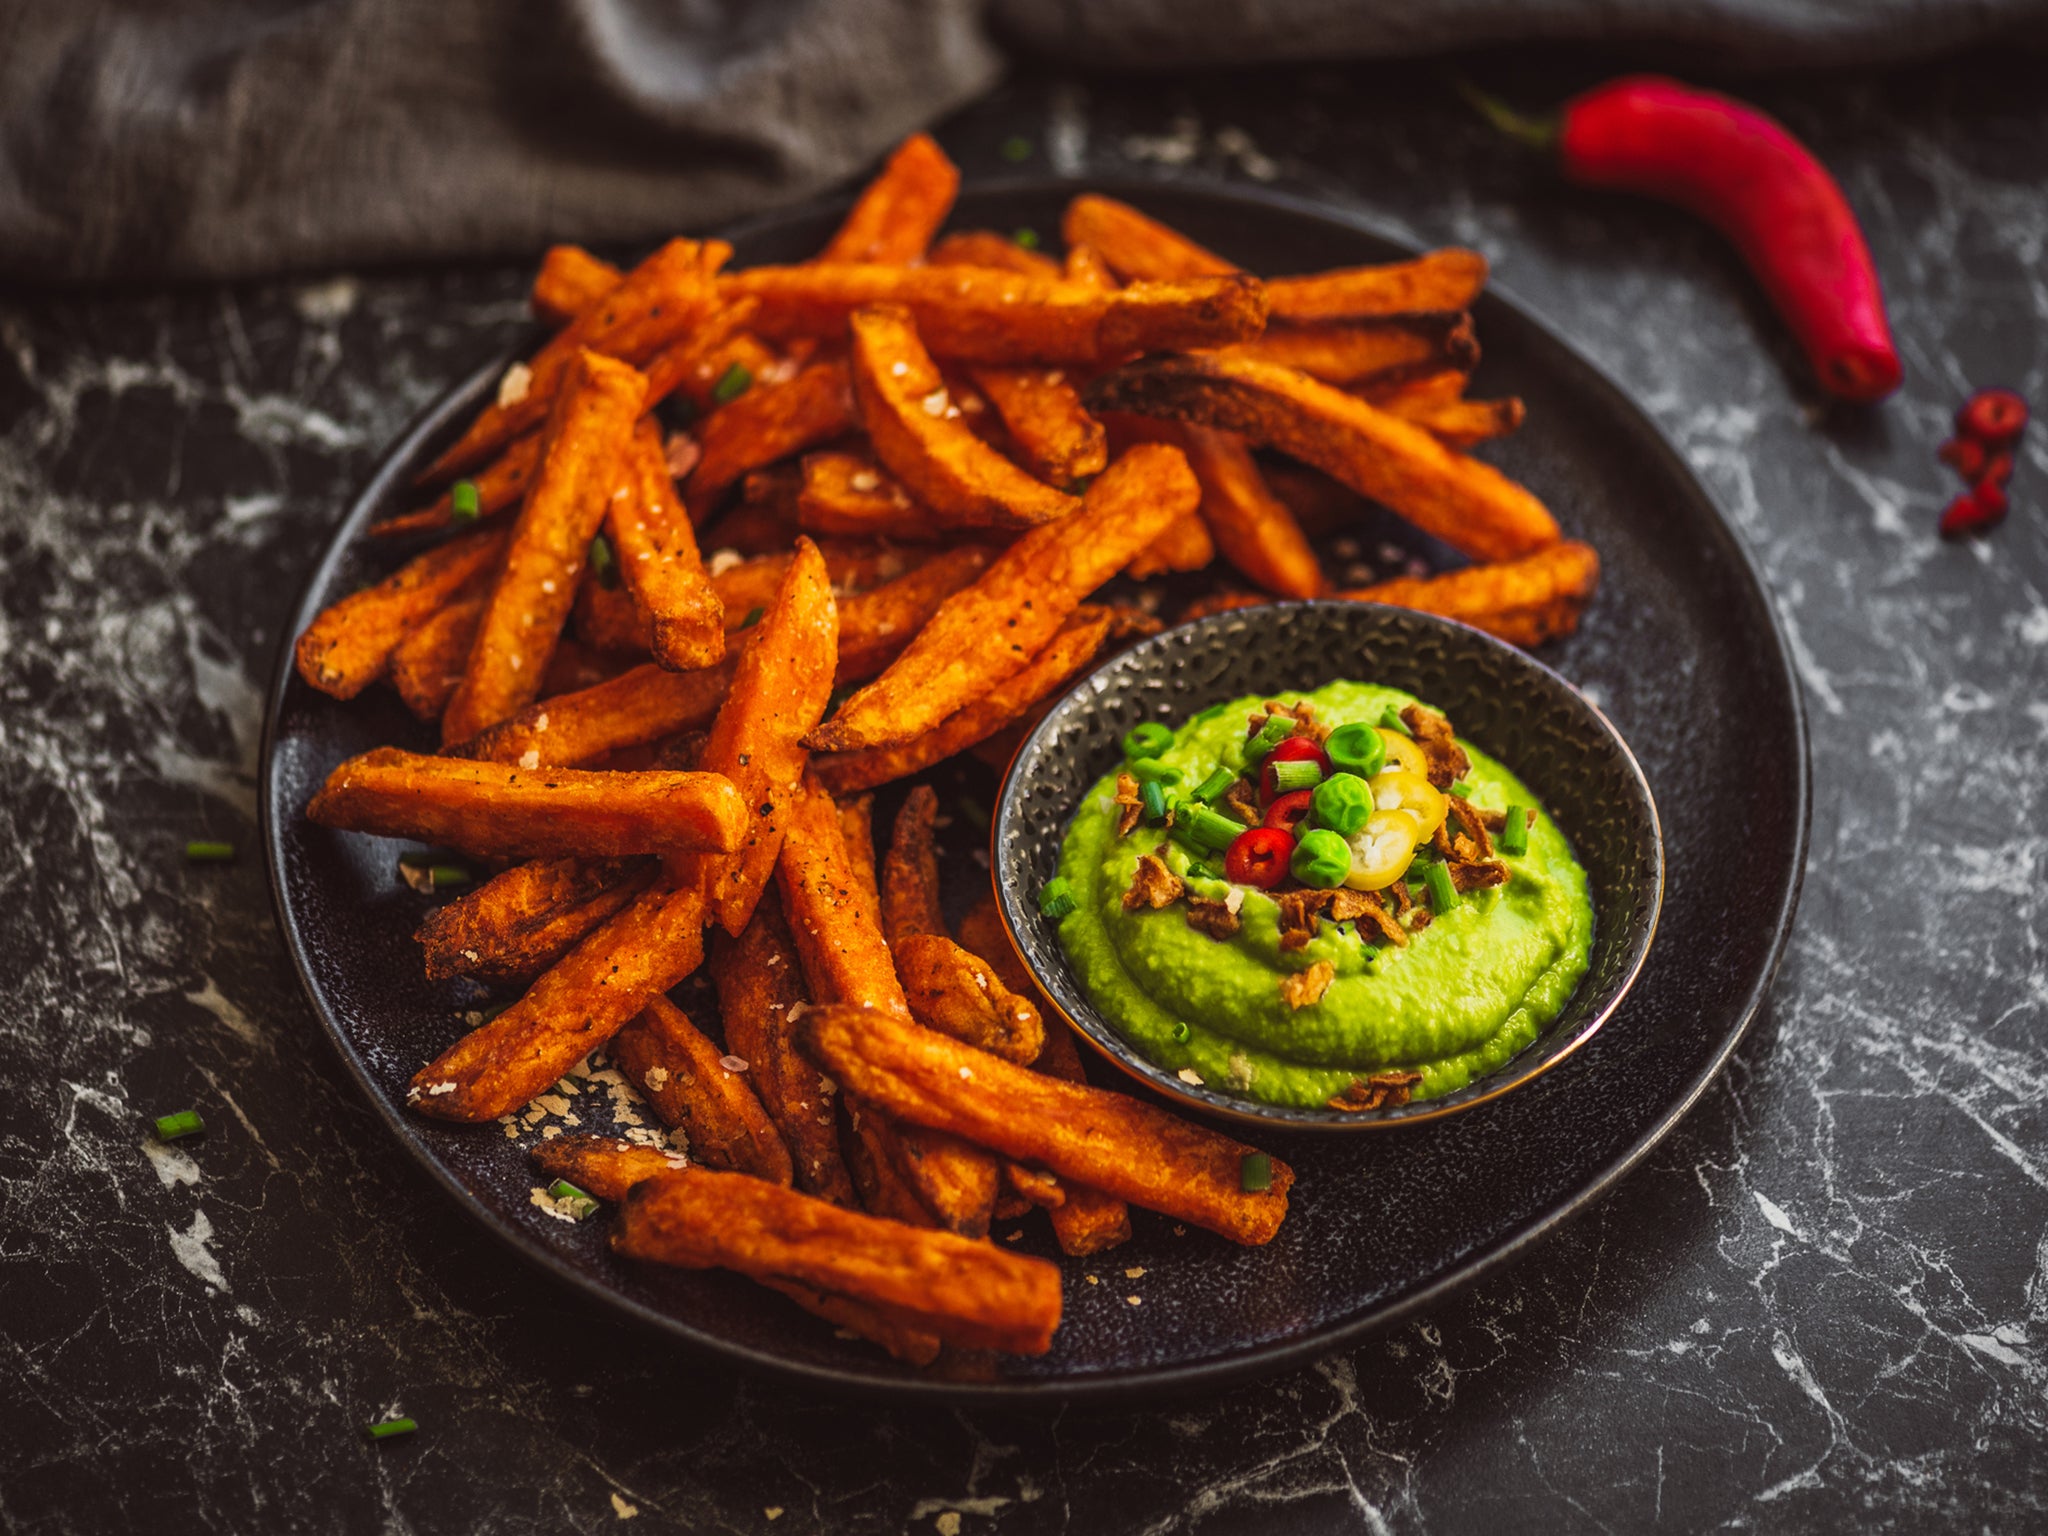 Crispy and delicious sweet potato fries made in the air fryer, perfect for a healthy snack